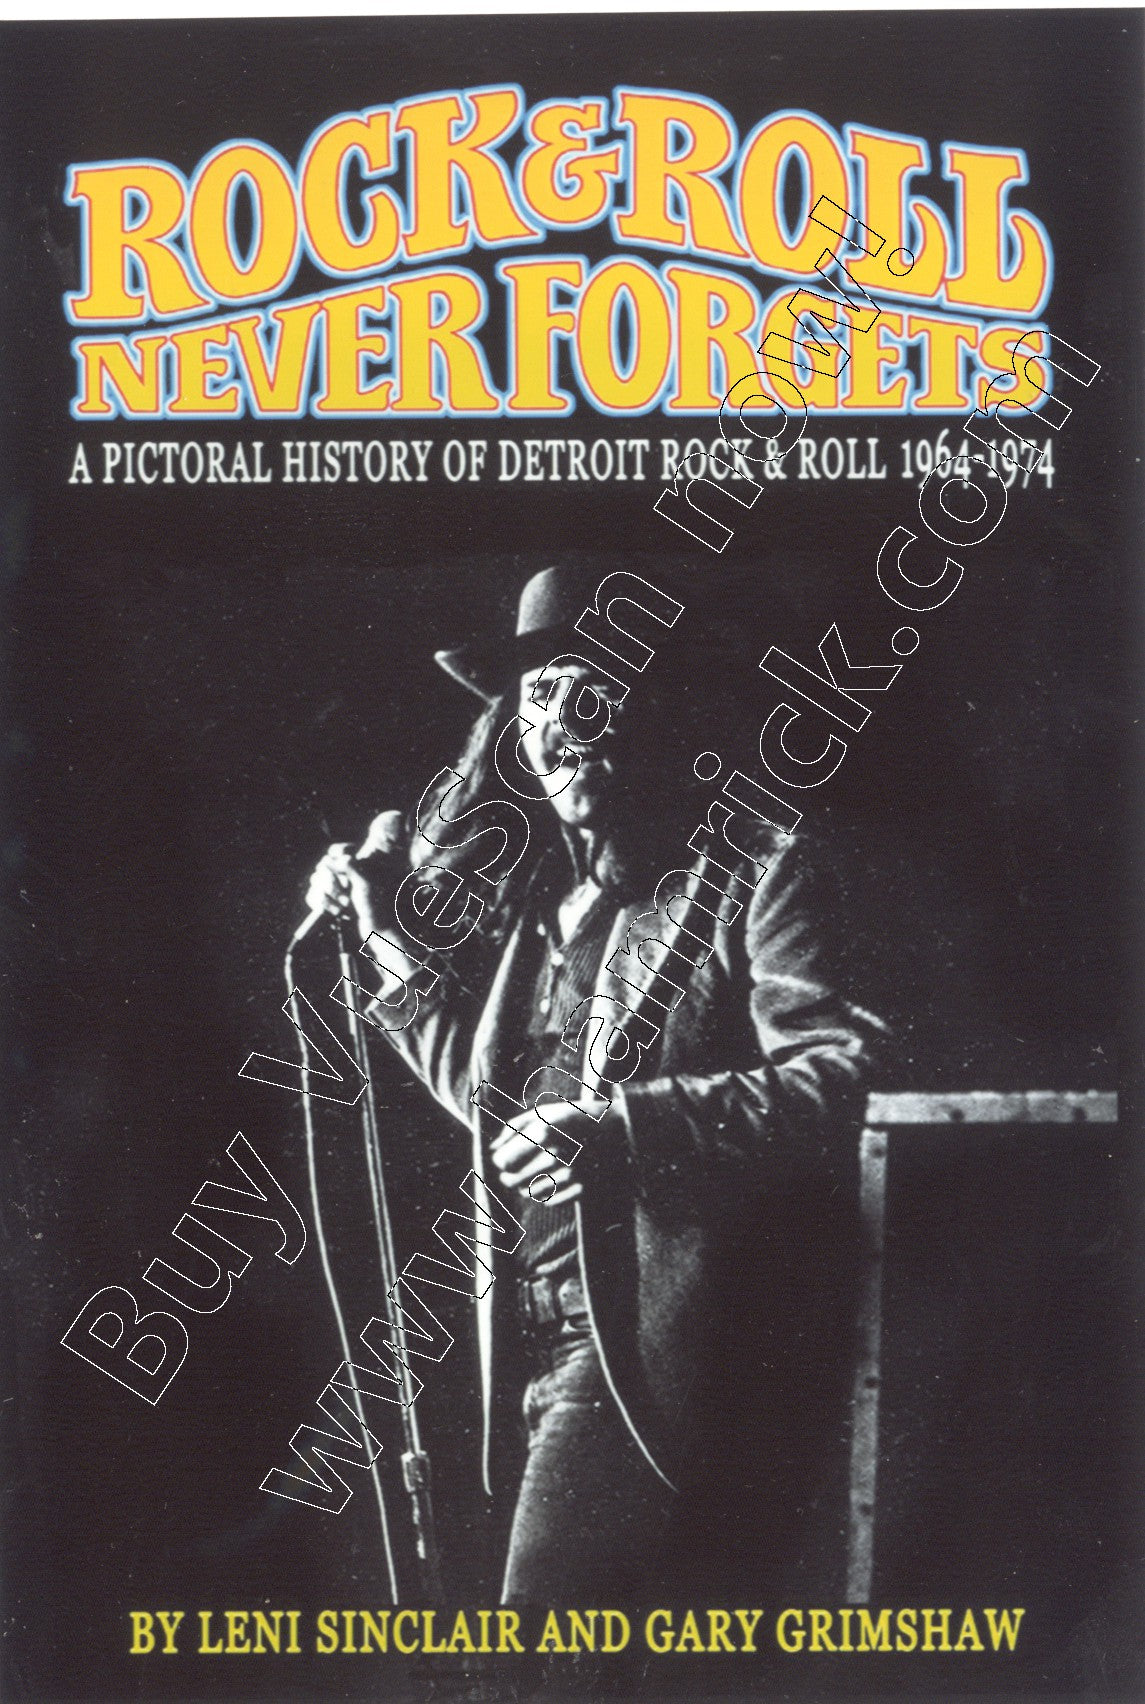 Rock & Roll never forgets Leni SInclair signed greeting card